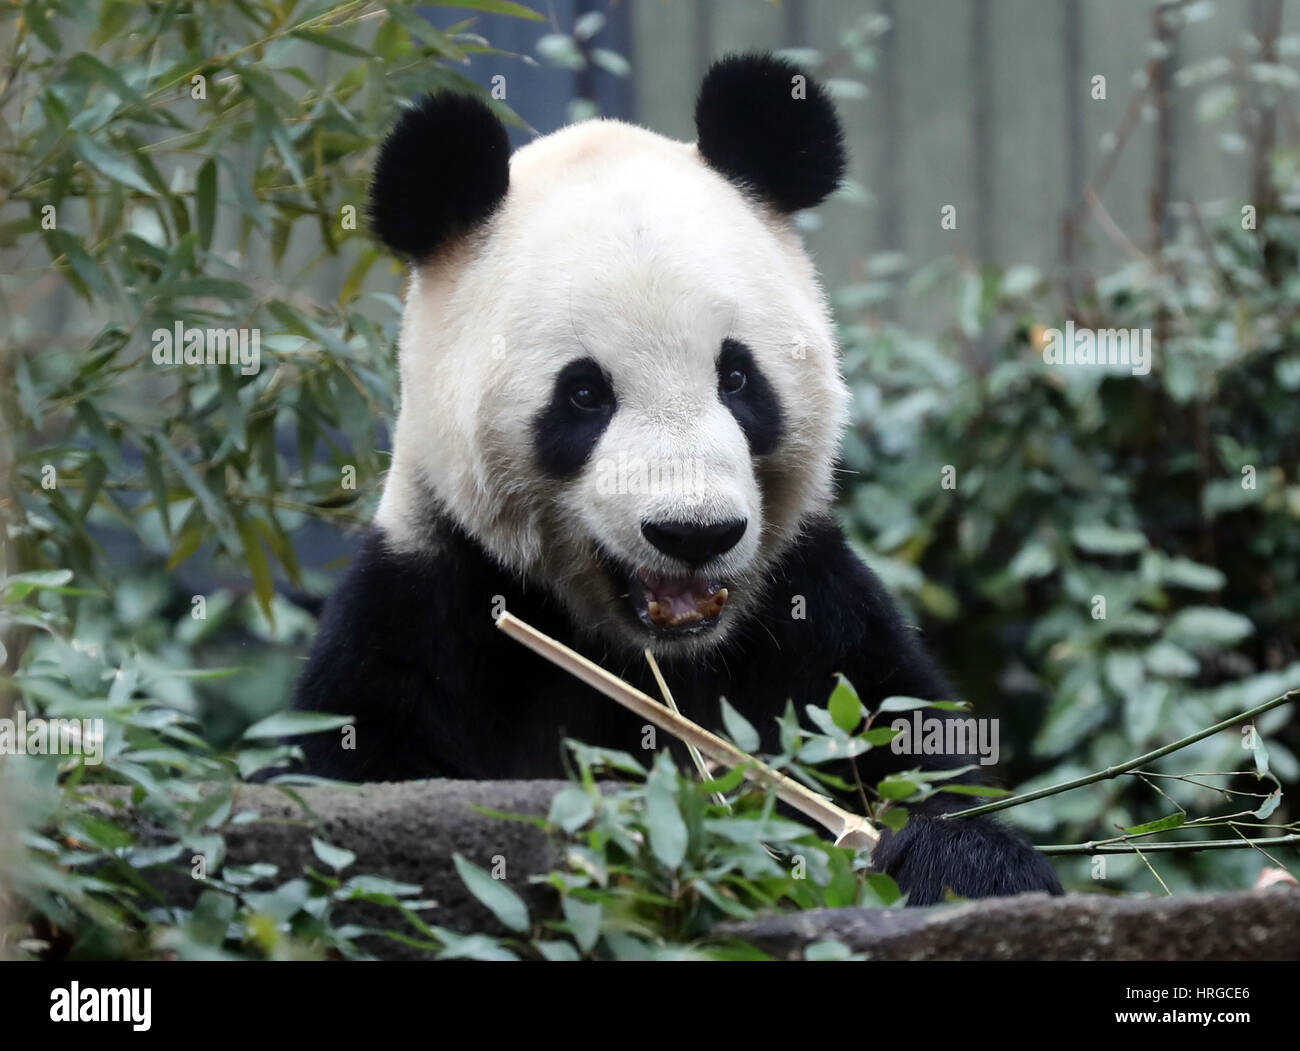 Tokyo, Japan. 2nd Mar, 2017. Male giant panda Ri Ri eats bamboo grass at the Ueno zoological gardens in Tokyo on Thursday, March 2, 2017. The zoo reopened to show male and female giant pandas for public separately after Mating. Credit: Yoshio Tsunoda/AFLO/Alamy Live News Stock Photo